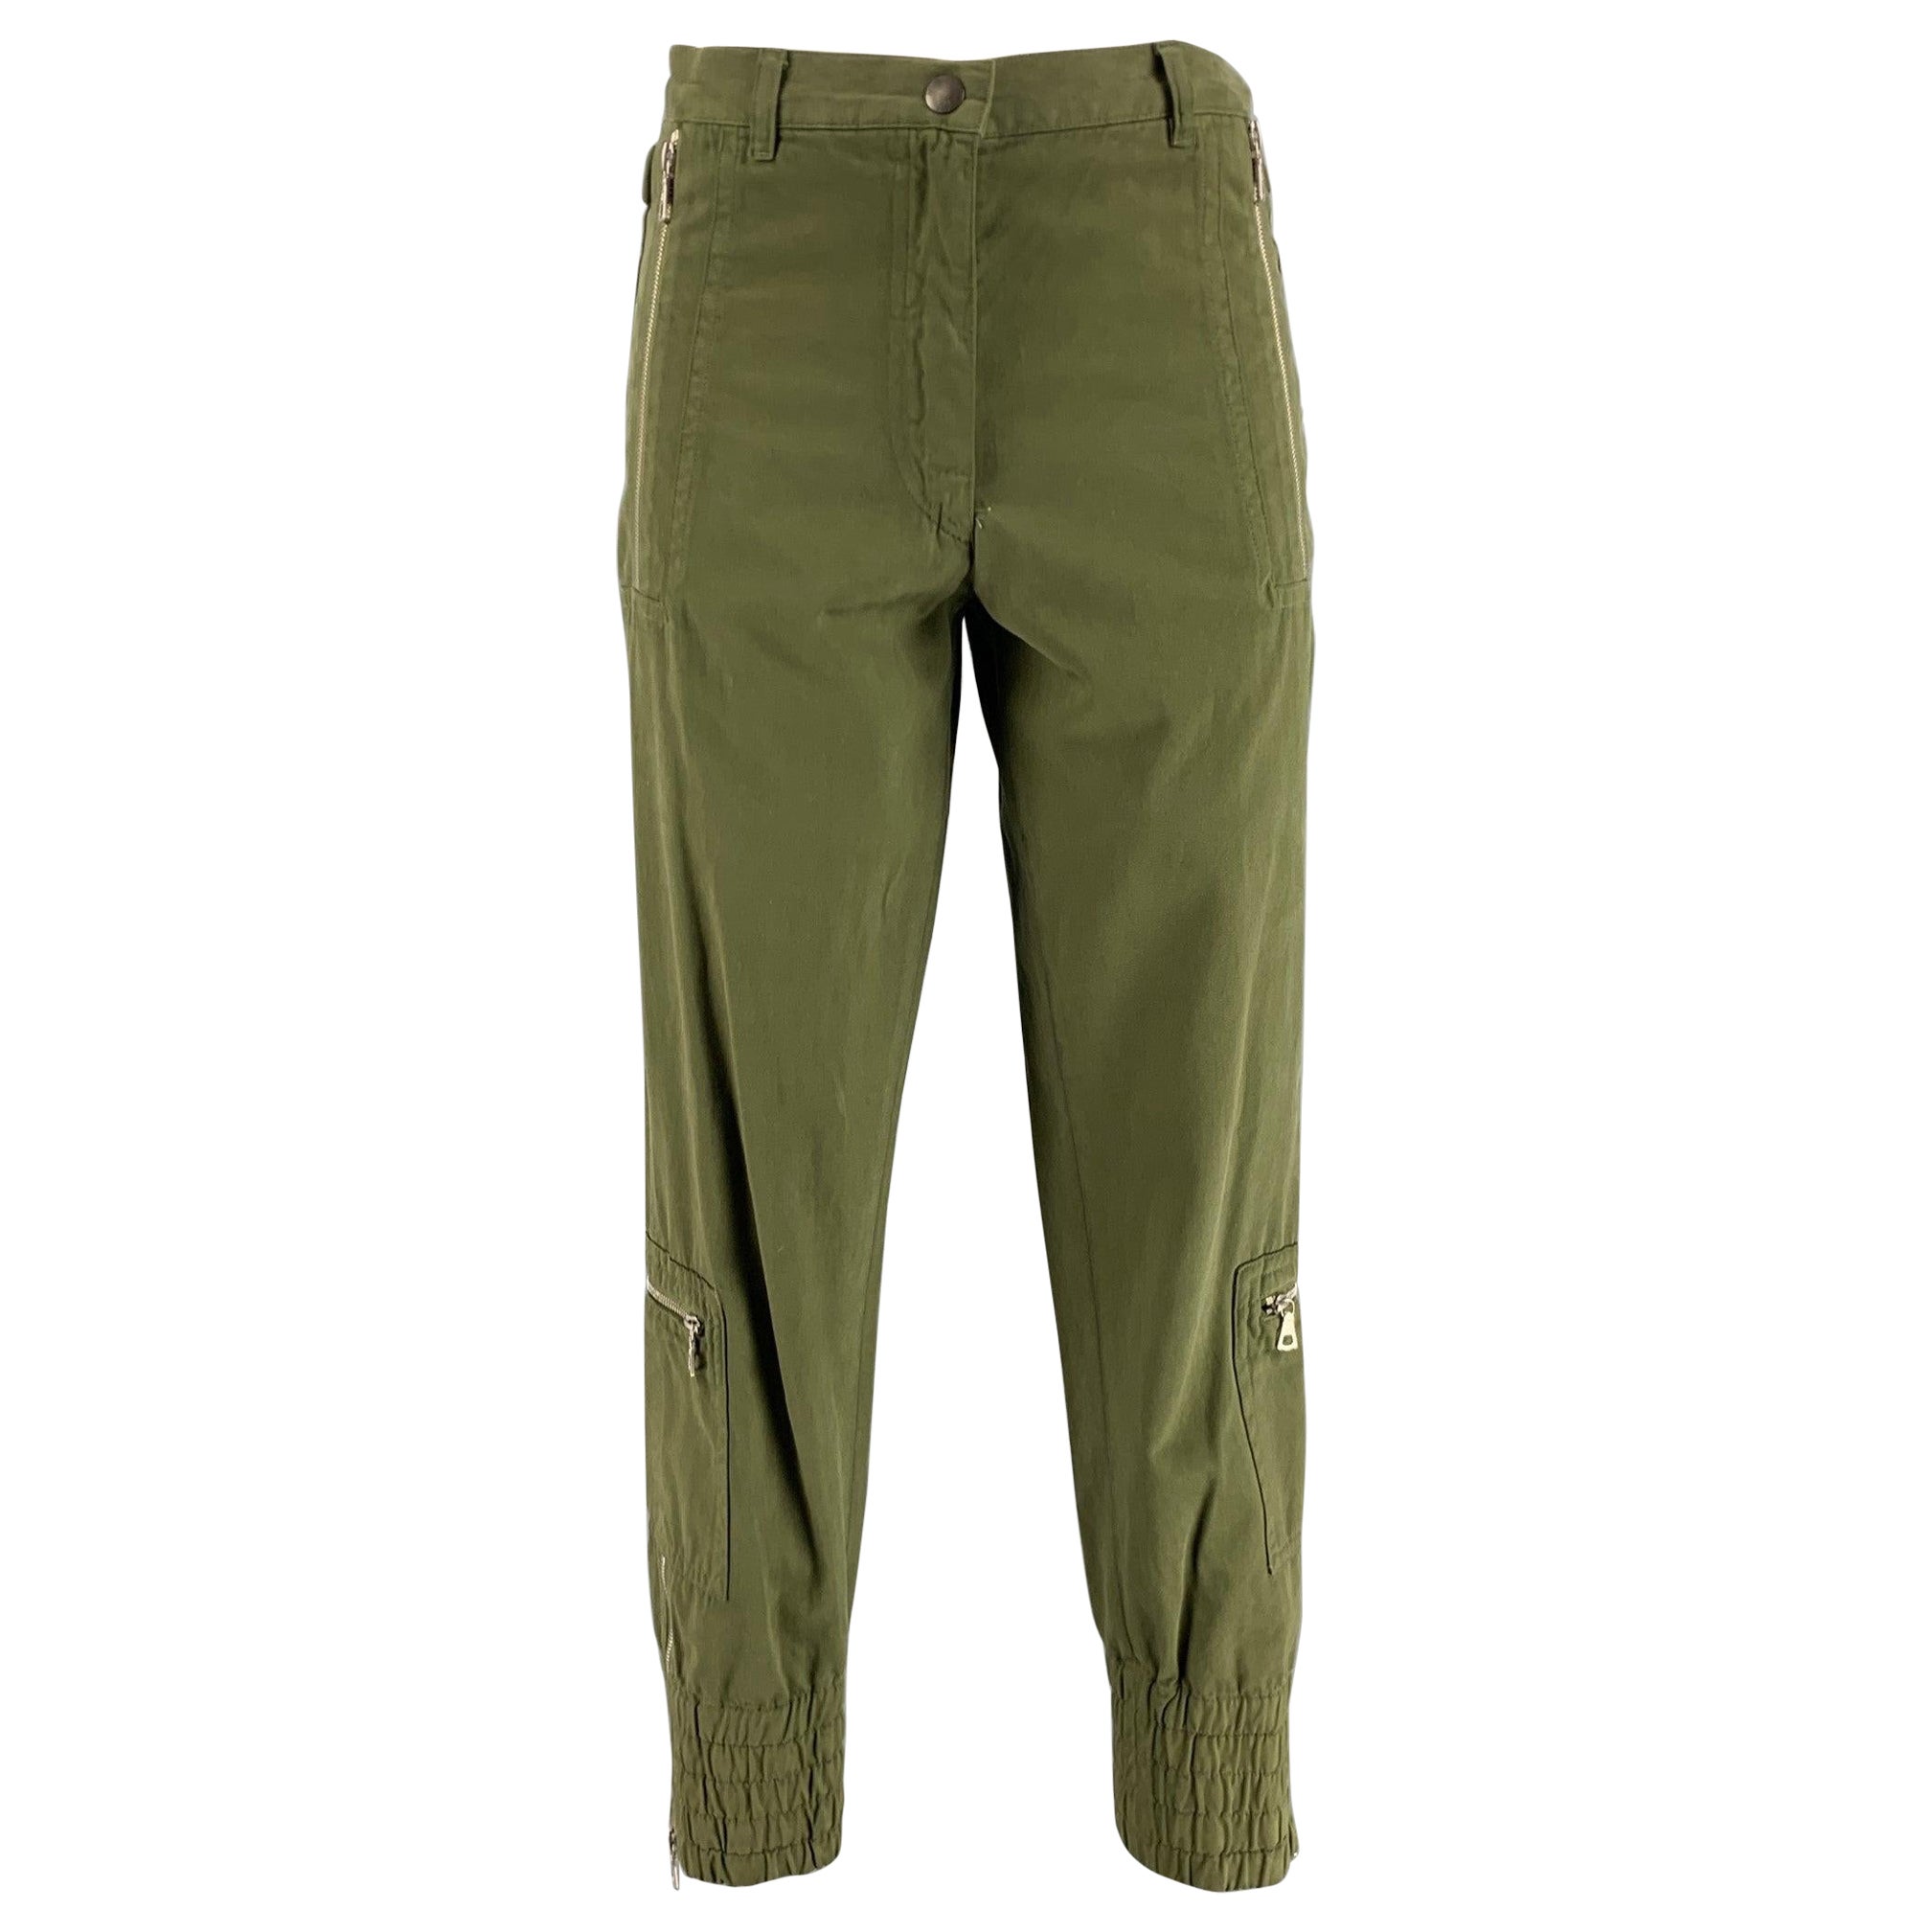 DRIES VAN NOTEN Size 4 Green Cotton Elastic Cuffs Chino Casual Pants For Sale